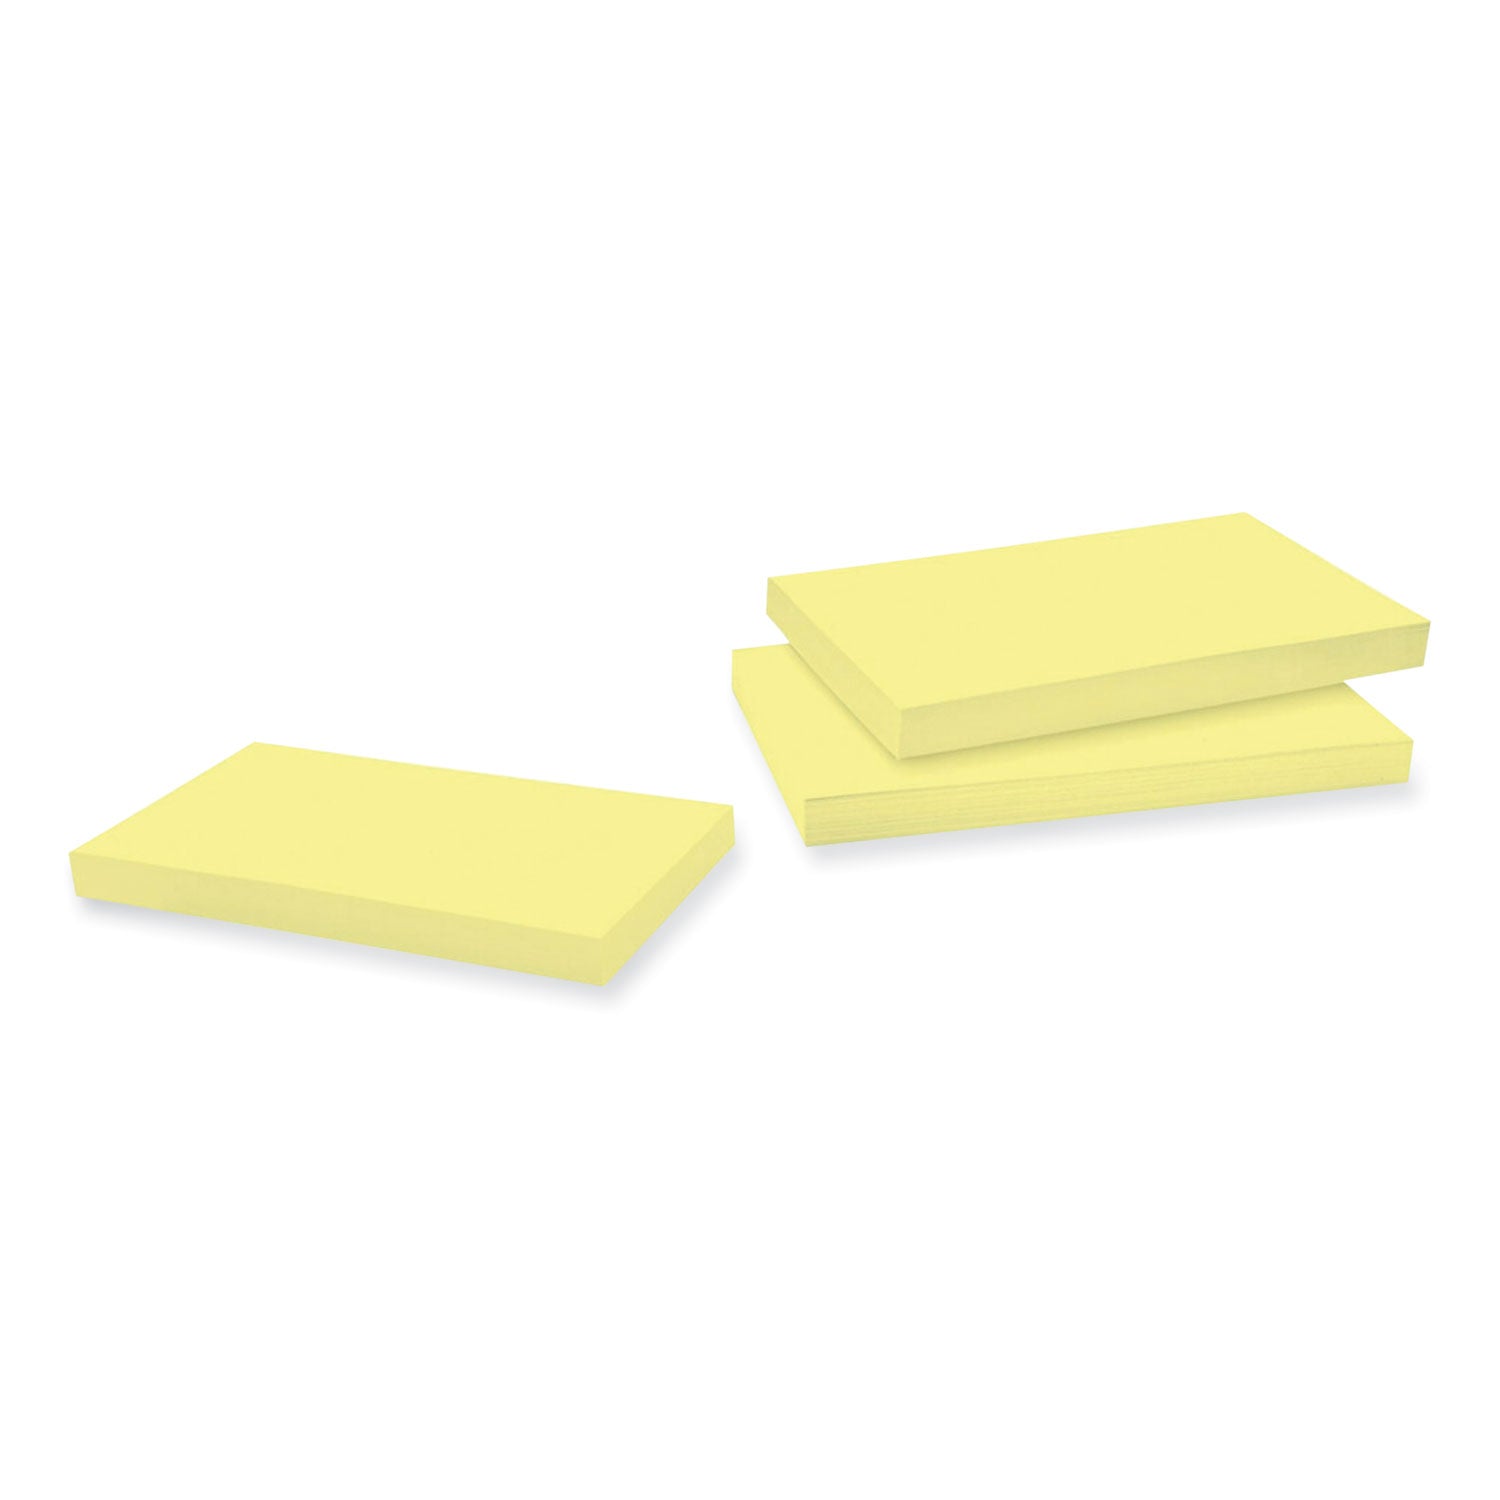 100%-recycled-paper-super-sticky-notes-3-x-5-canary-yellow-70-sheets-pad-12-pads-pack_mmm655r12sscy - 3